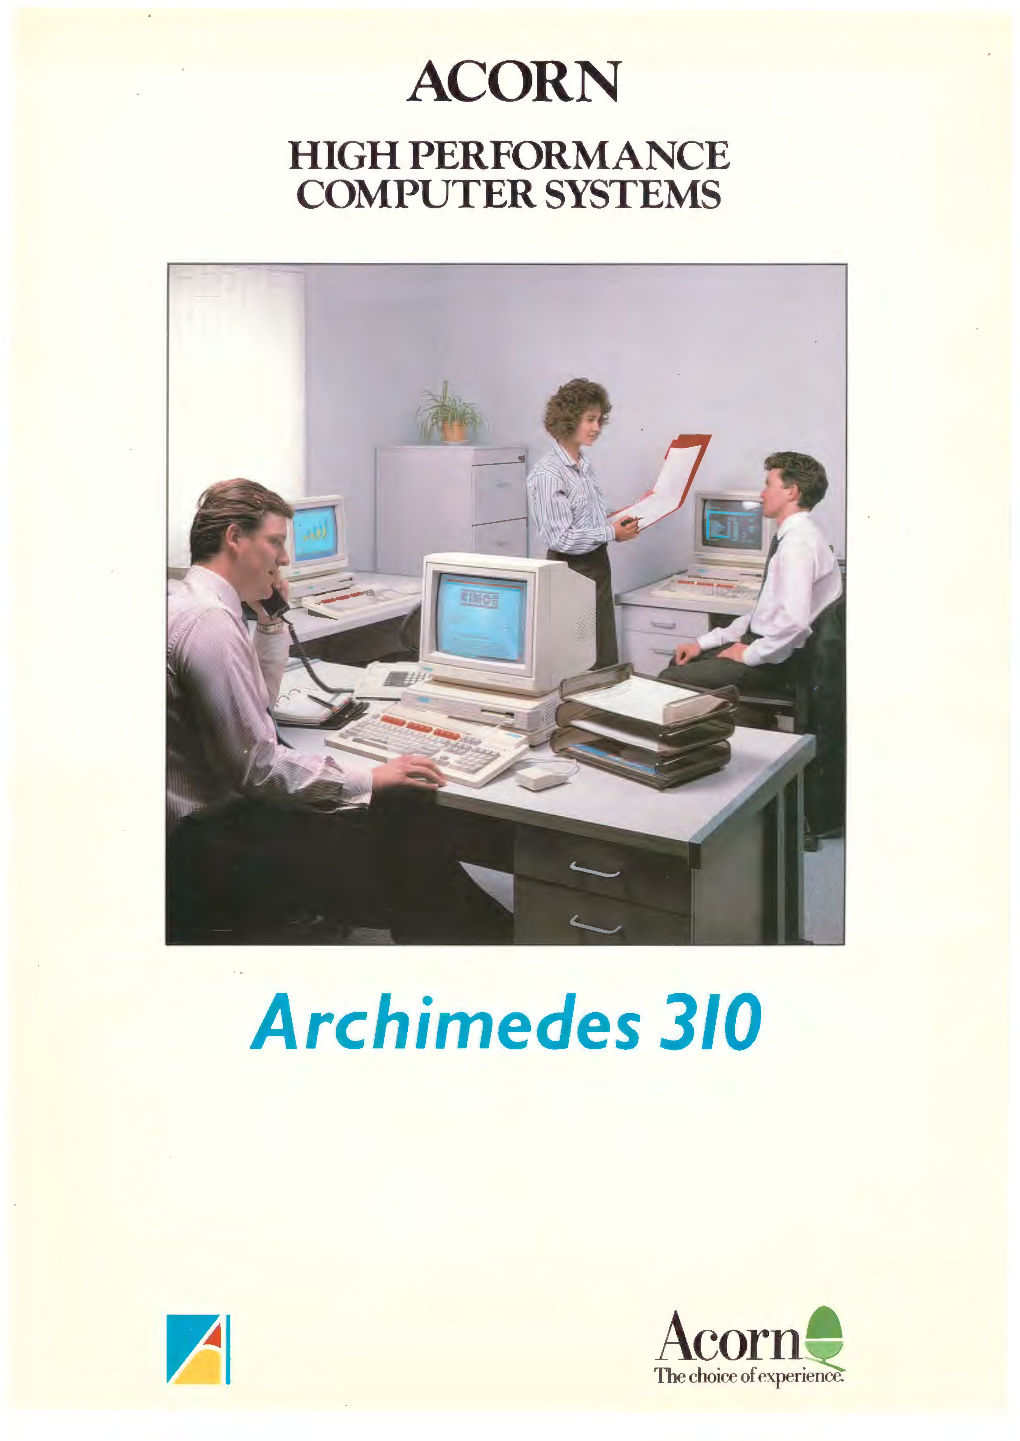 High Performance Computer Systems Archimedes